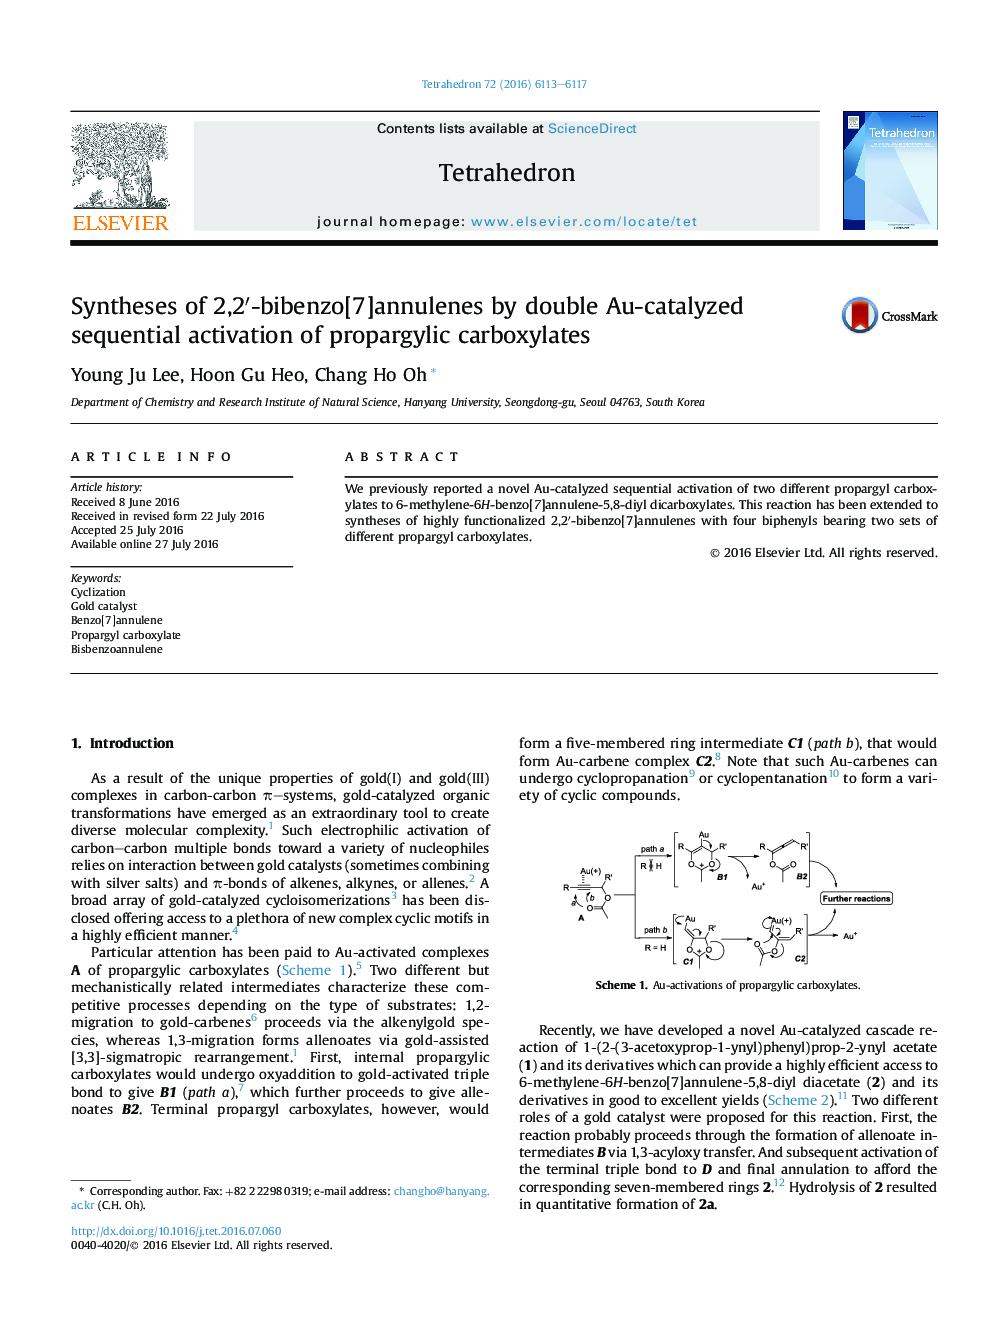 Syntheses of 2,2â²-bibenzo[7]annulenes by double Au-catalyzed sequential activation of propargylic carboxylates